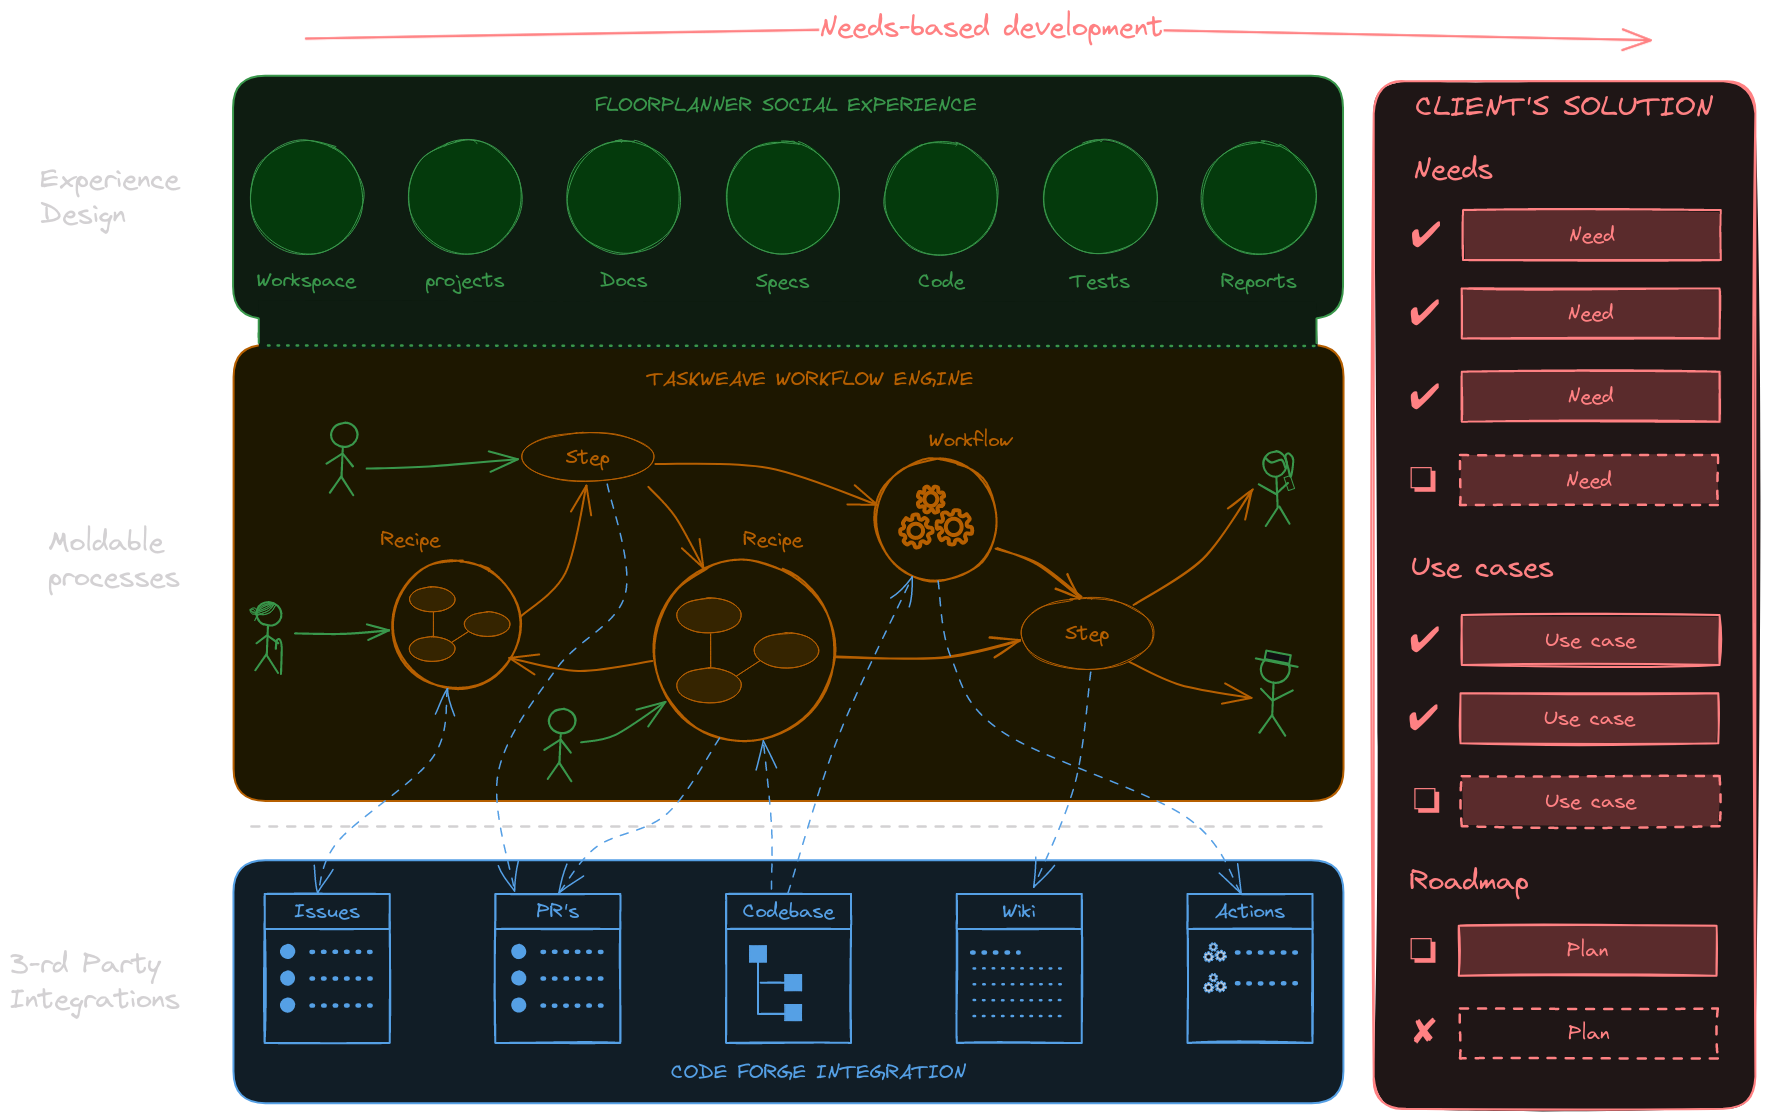 Diagram that shows a conceptual overview of the Solidground tool suite. On the right are three blocks.
      From top to bottom they are Floorplanner social experience for experience design, Taskweave workflow engine
      to support moldable processes, and separated by a dotted line an example of a system integration with a
      code forge. On the right side a block depicts the Solution containing checklists for Needs, Use cases
      and Roadmap plans